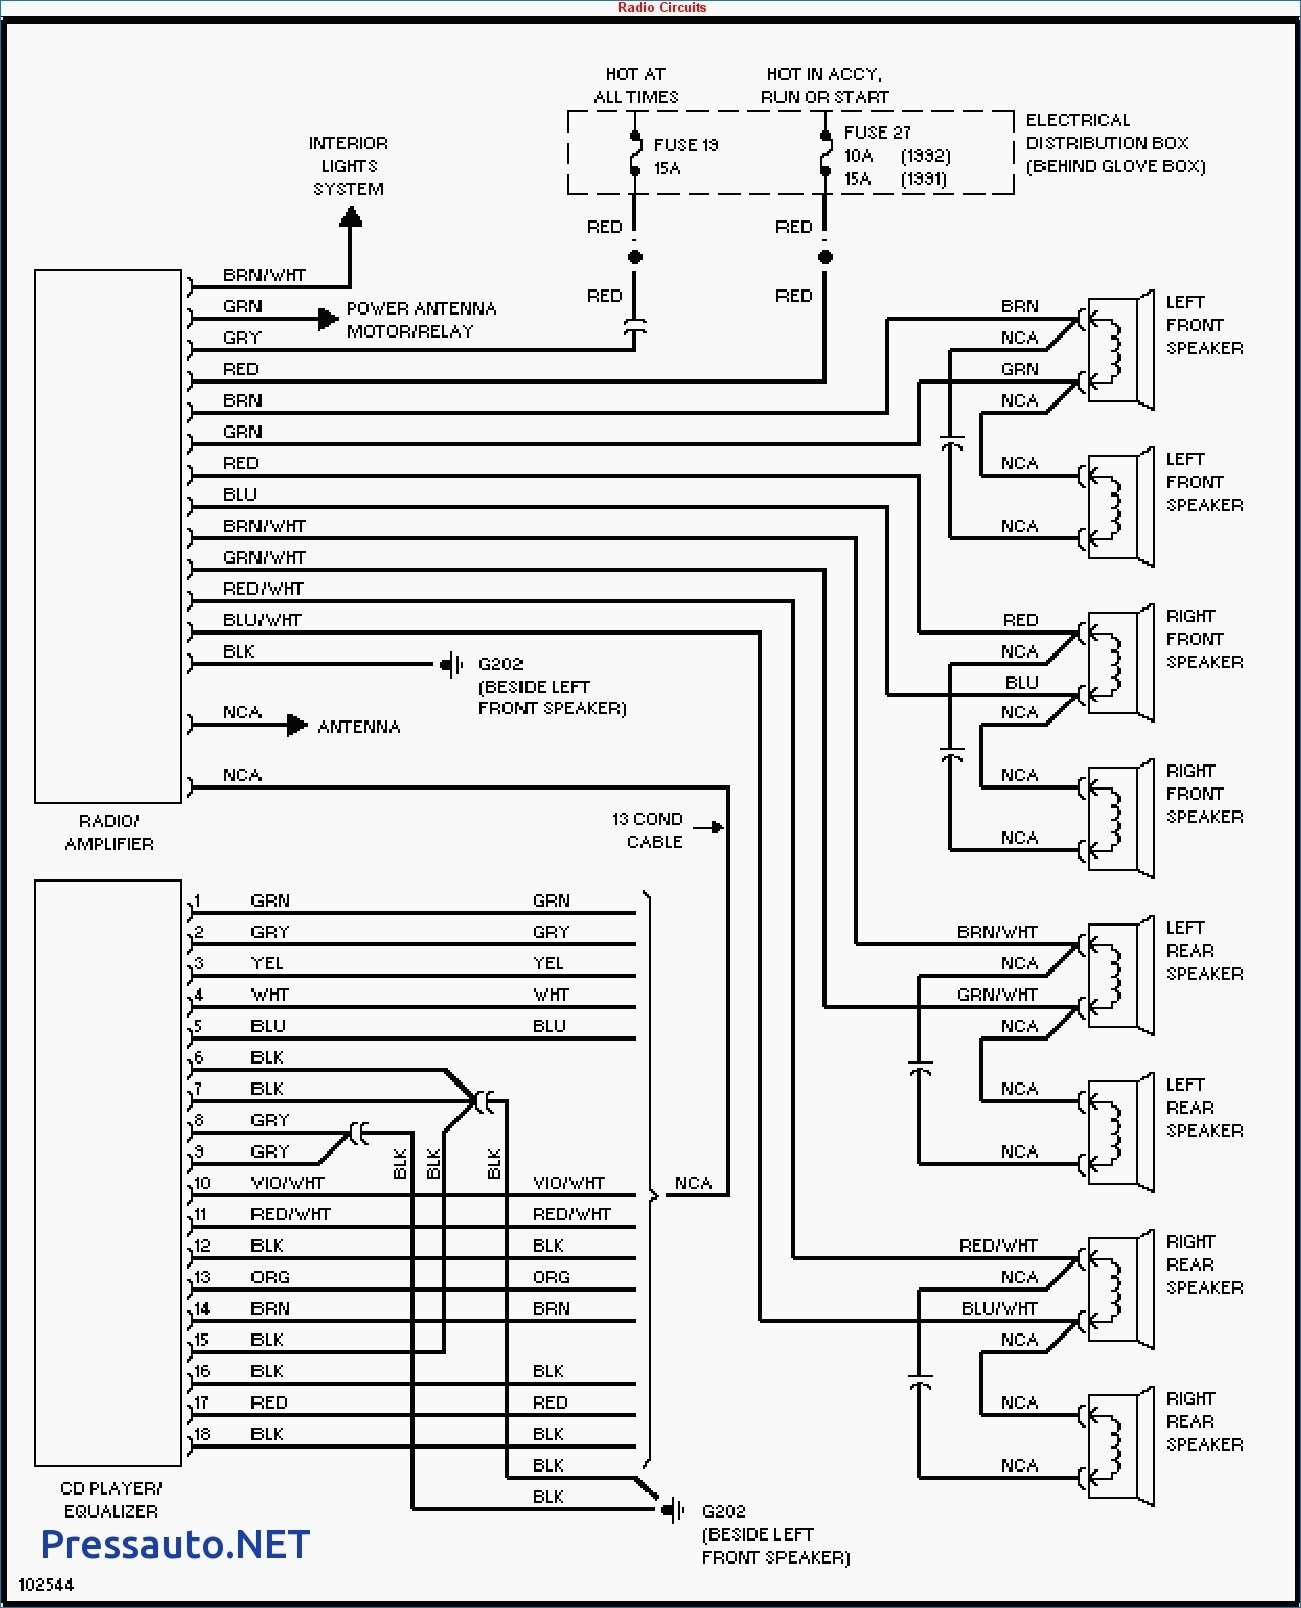 Wiring Diagram For A 1998 Jeep Cherokee Fresh New 1998 Jeep Grand Cherokee Radio Wiring Diagram Irelandnews